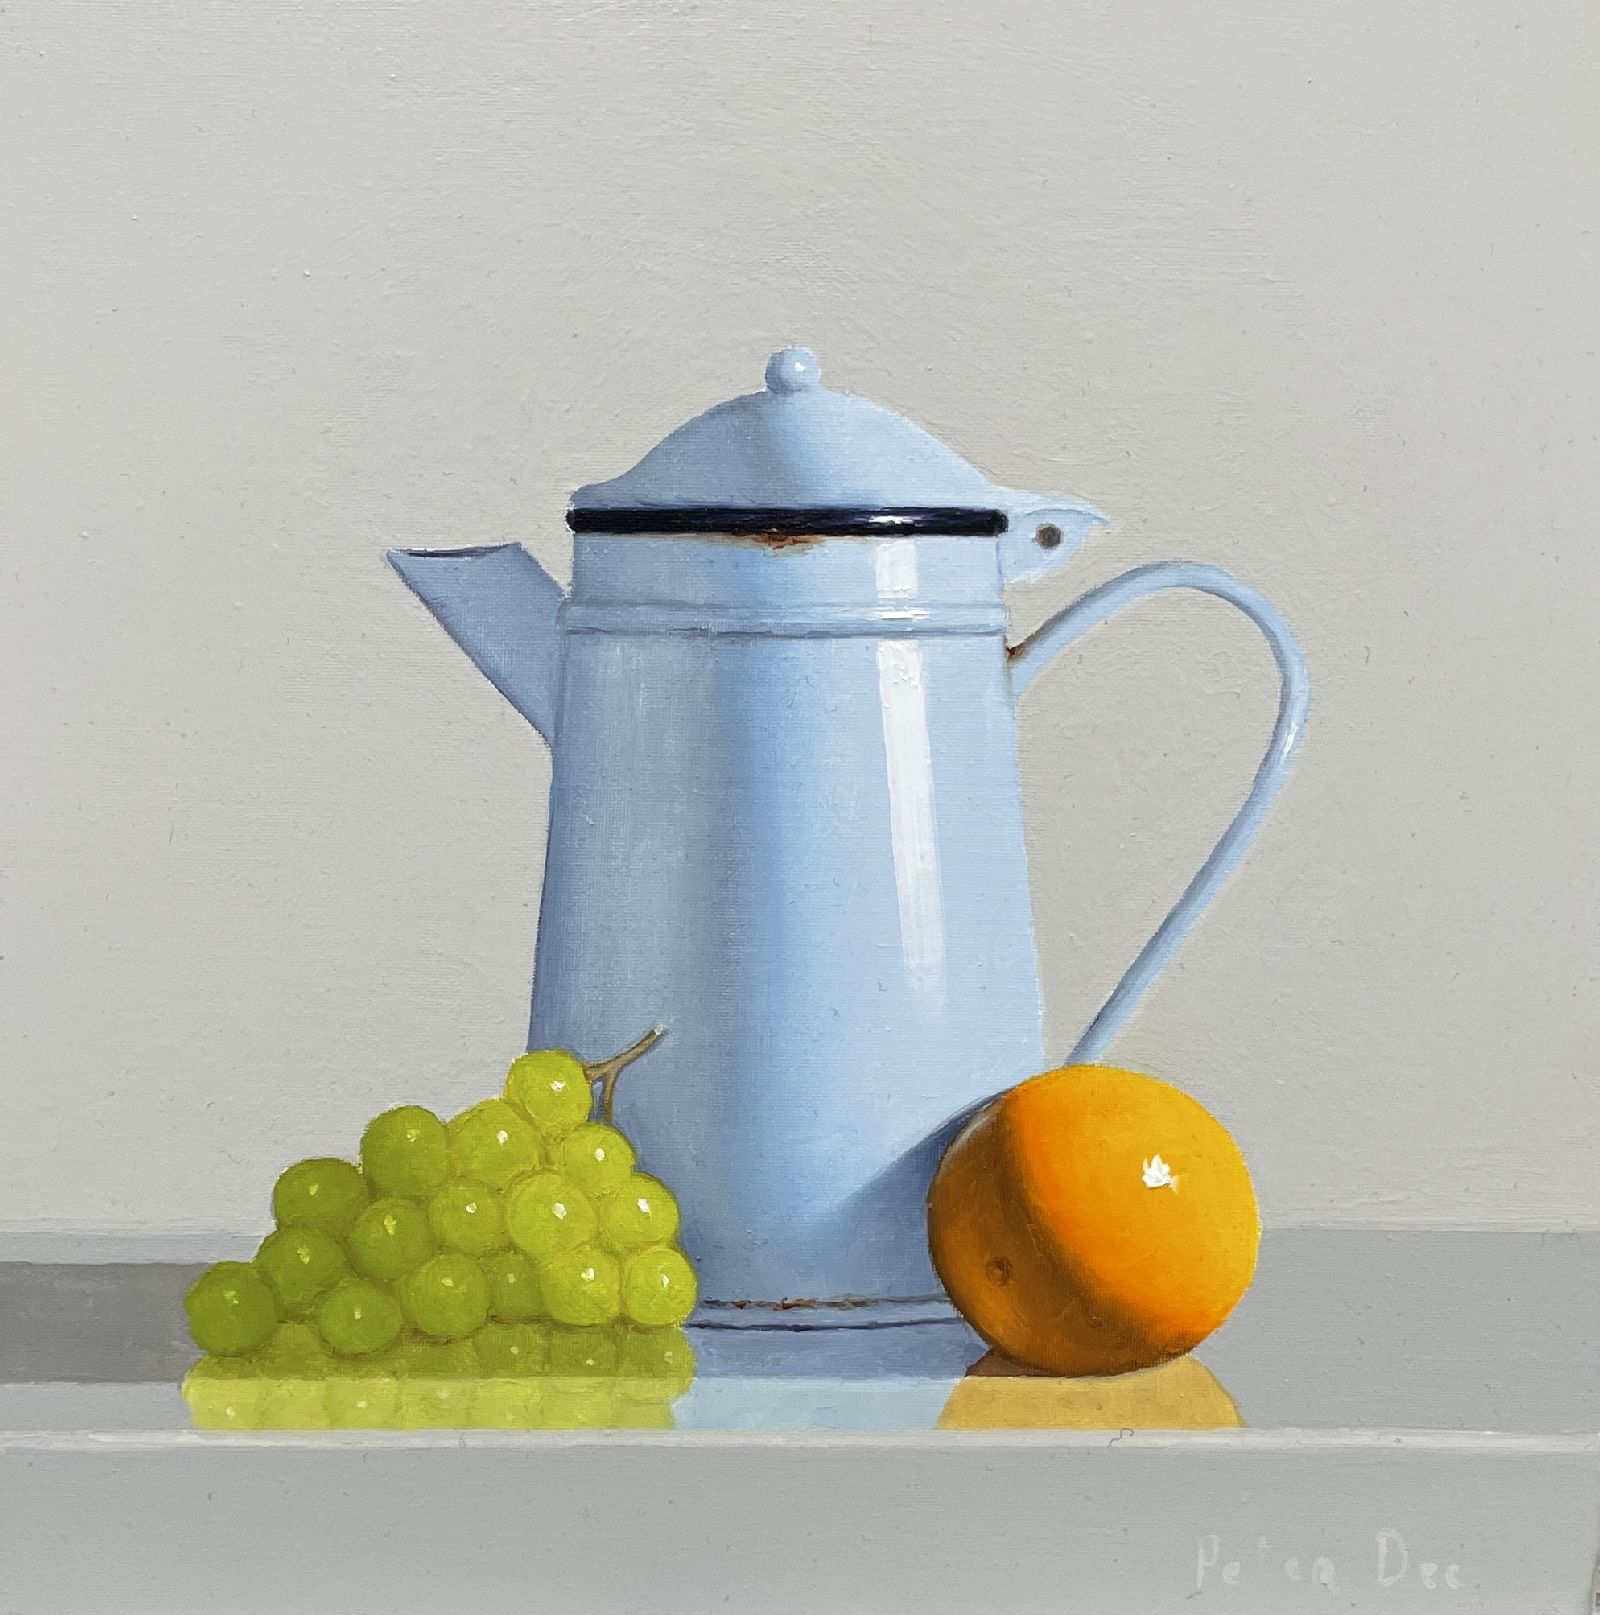 Peter Dee - Vintage Blue Coffee Pot with Grapes and Orange